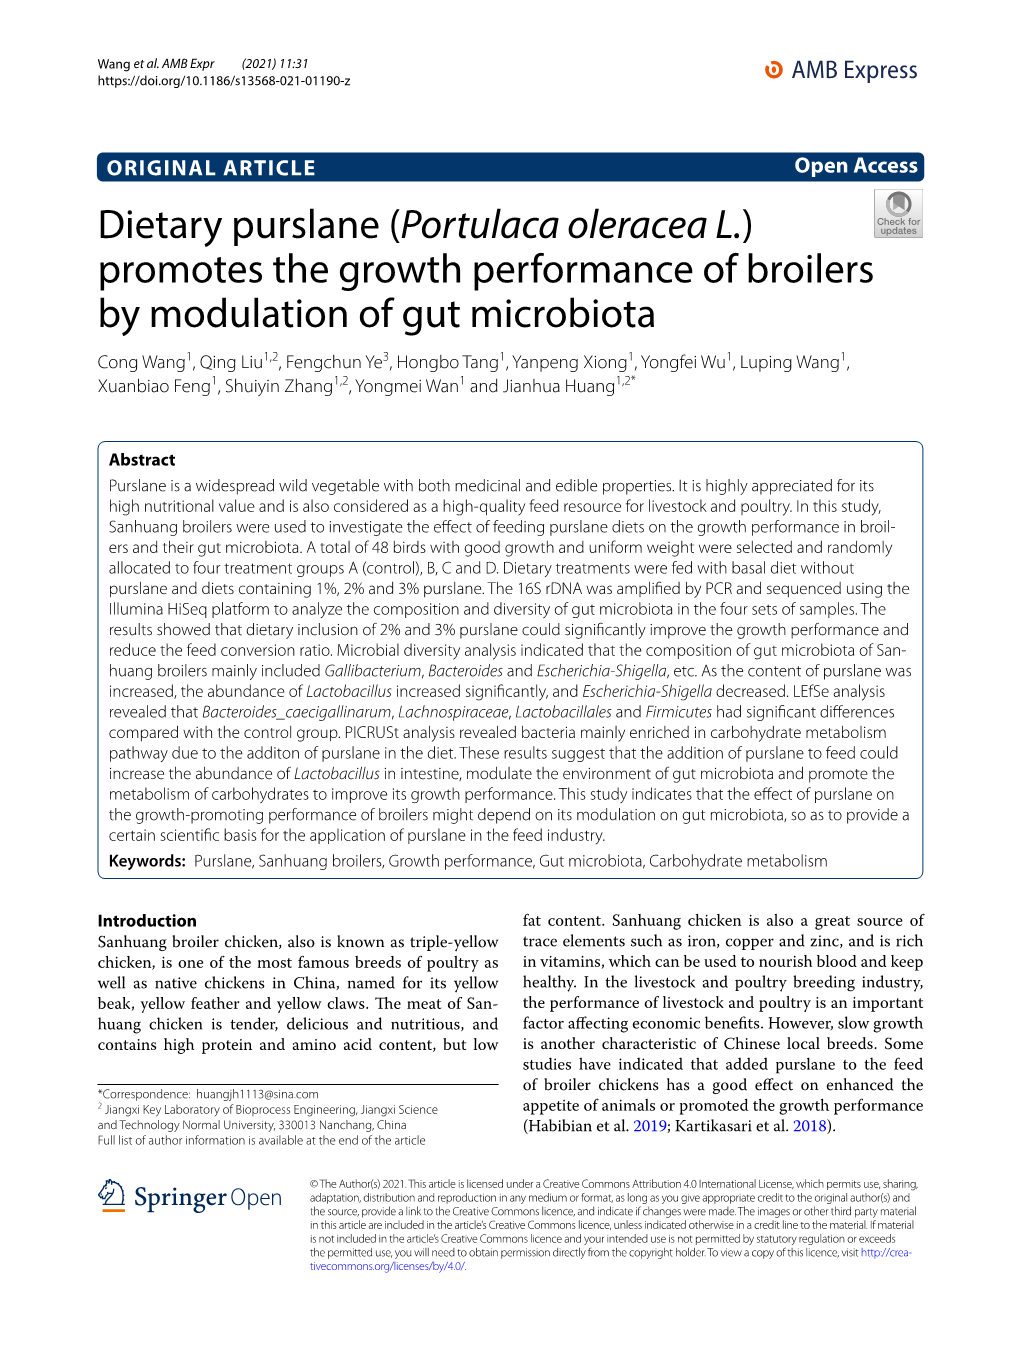 Dietary Purslane (Portulaca Oleracea L.) Promotes the Growth Performance of Broilers by Modulation of Gut Microbiota